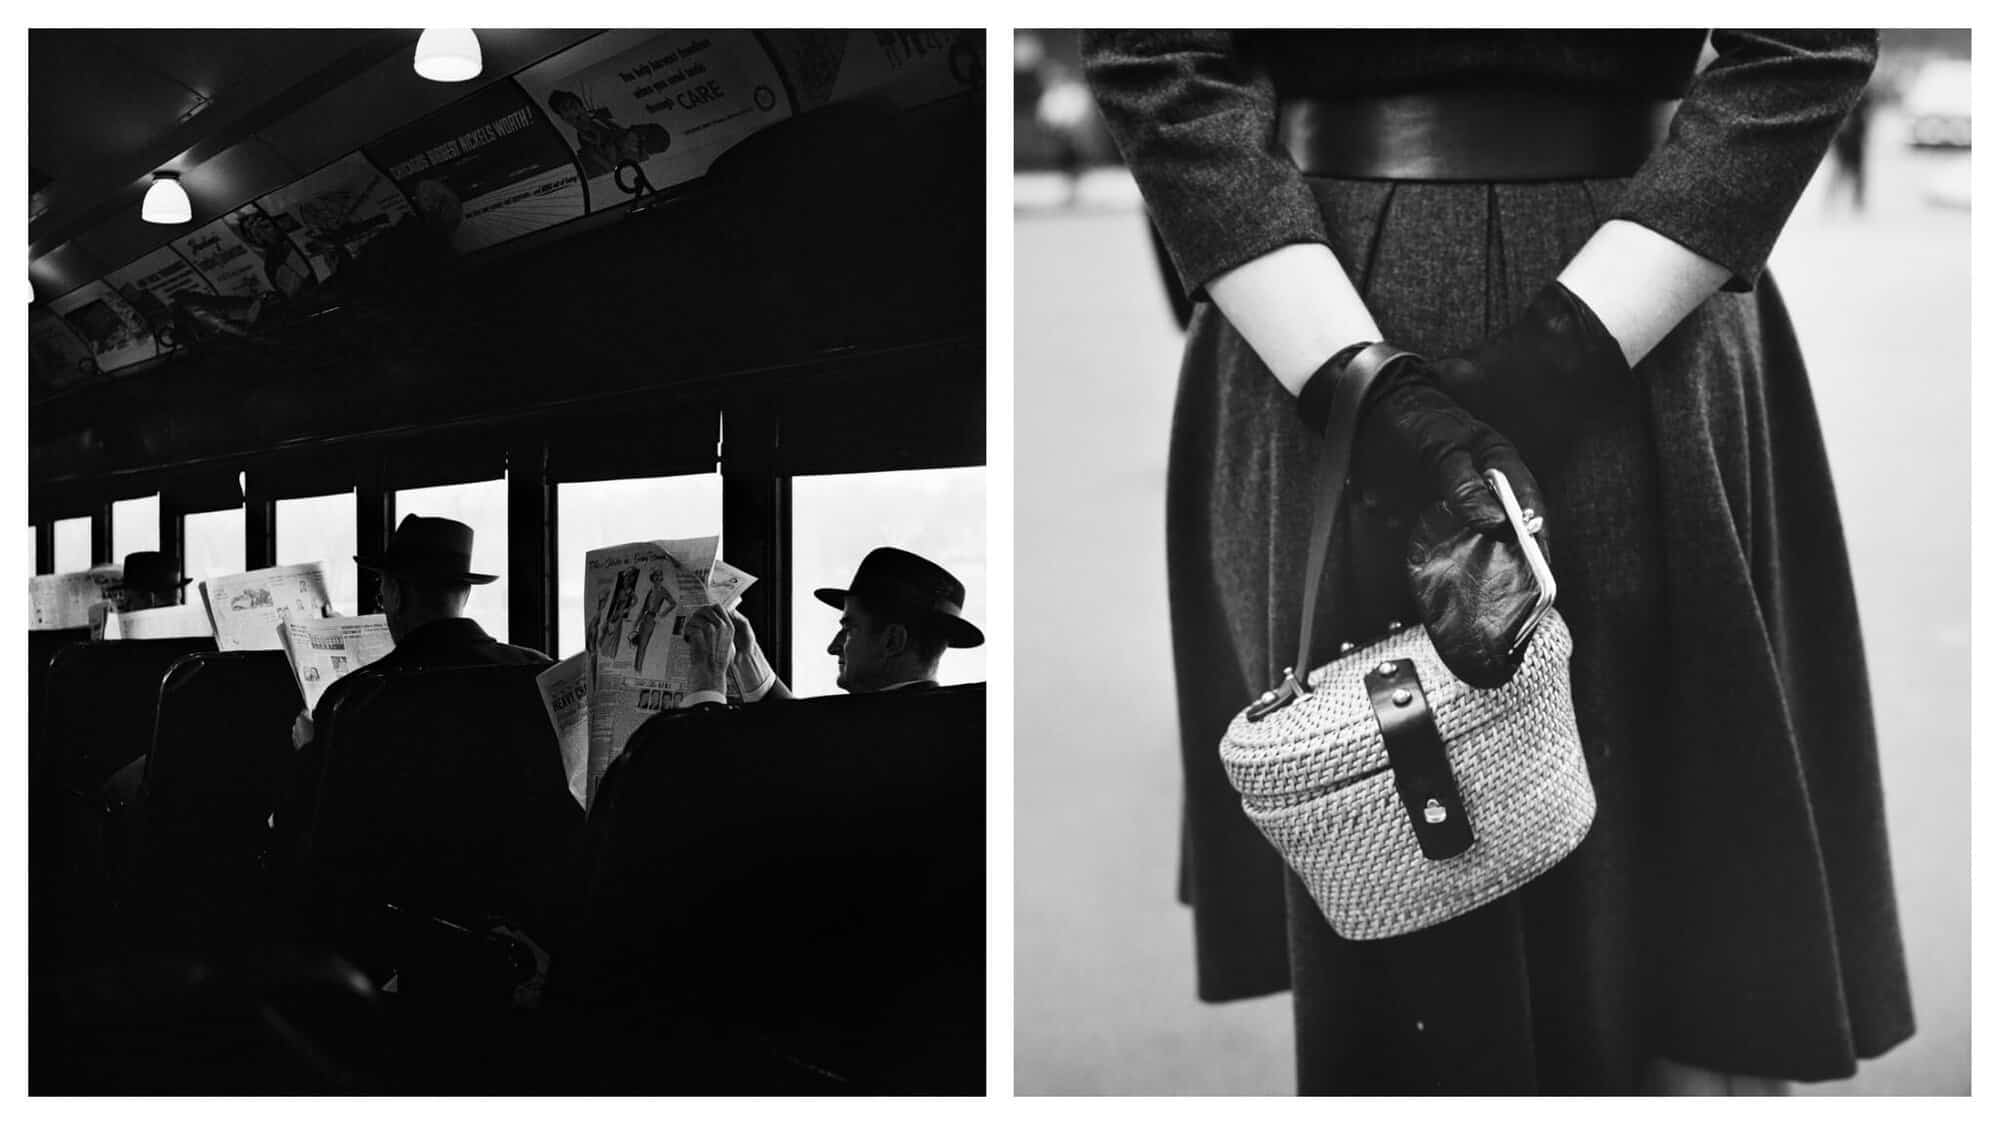 Two black and white photographs by Vivian Maier.